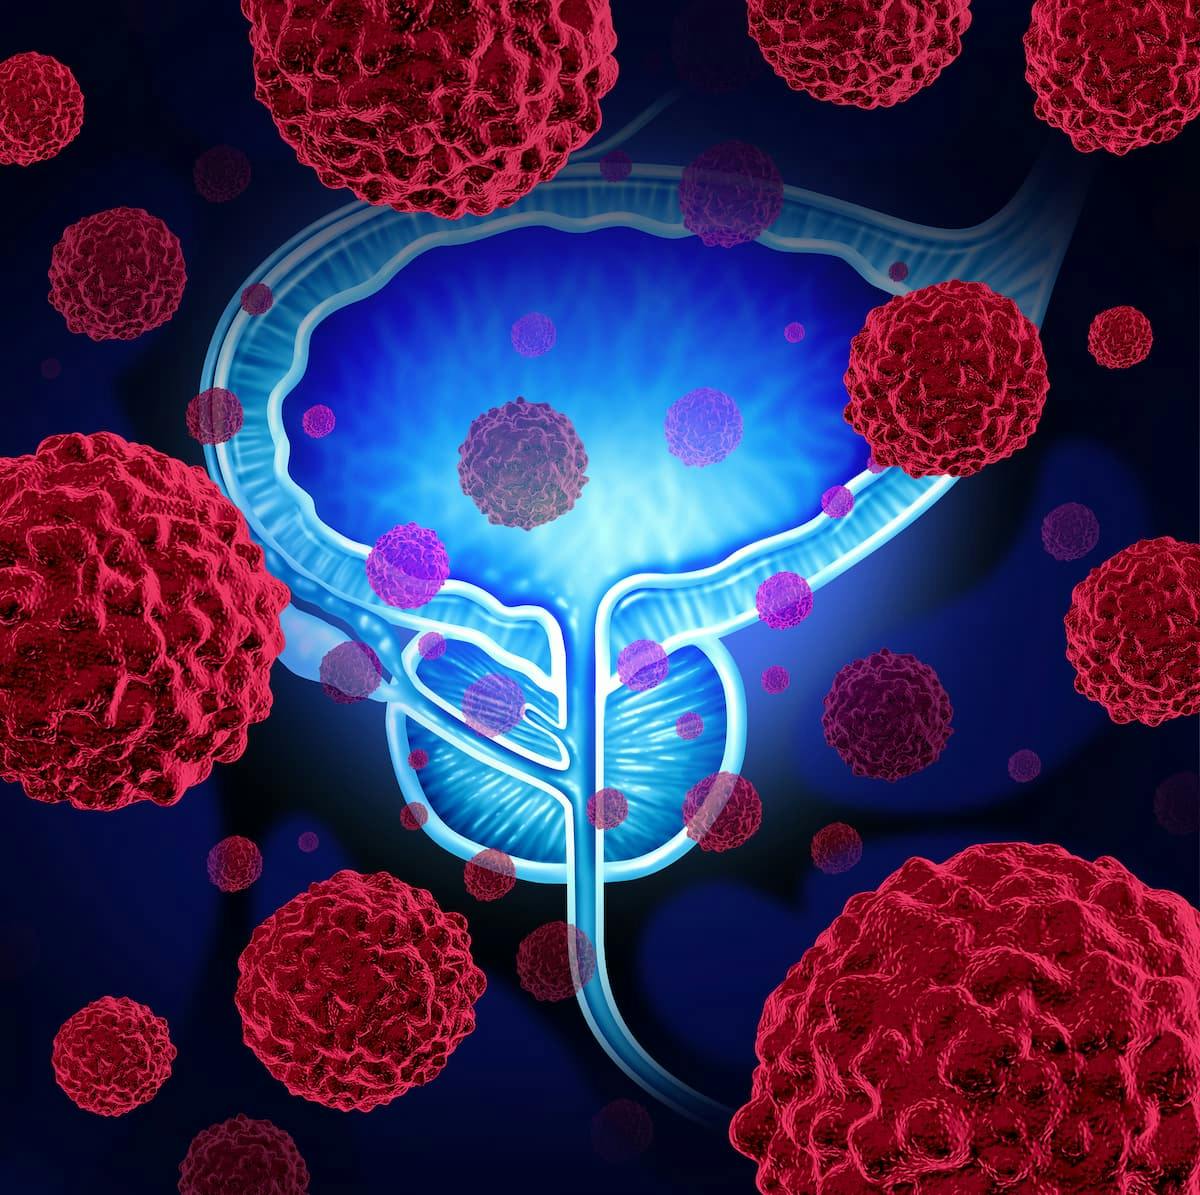 Investigators are currently assessing ARX517 in the phase 1/2 APEX-01 trial (NCT04662580) among patients with metastatic CRPC with disease progression after a minimum of 2 FDA-approved therapies for prostate cancer.